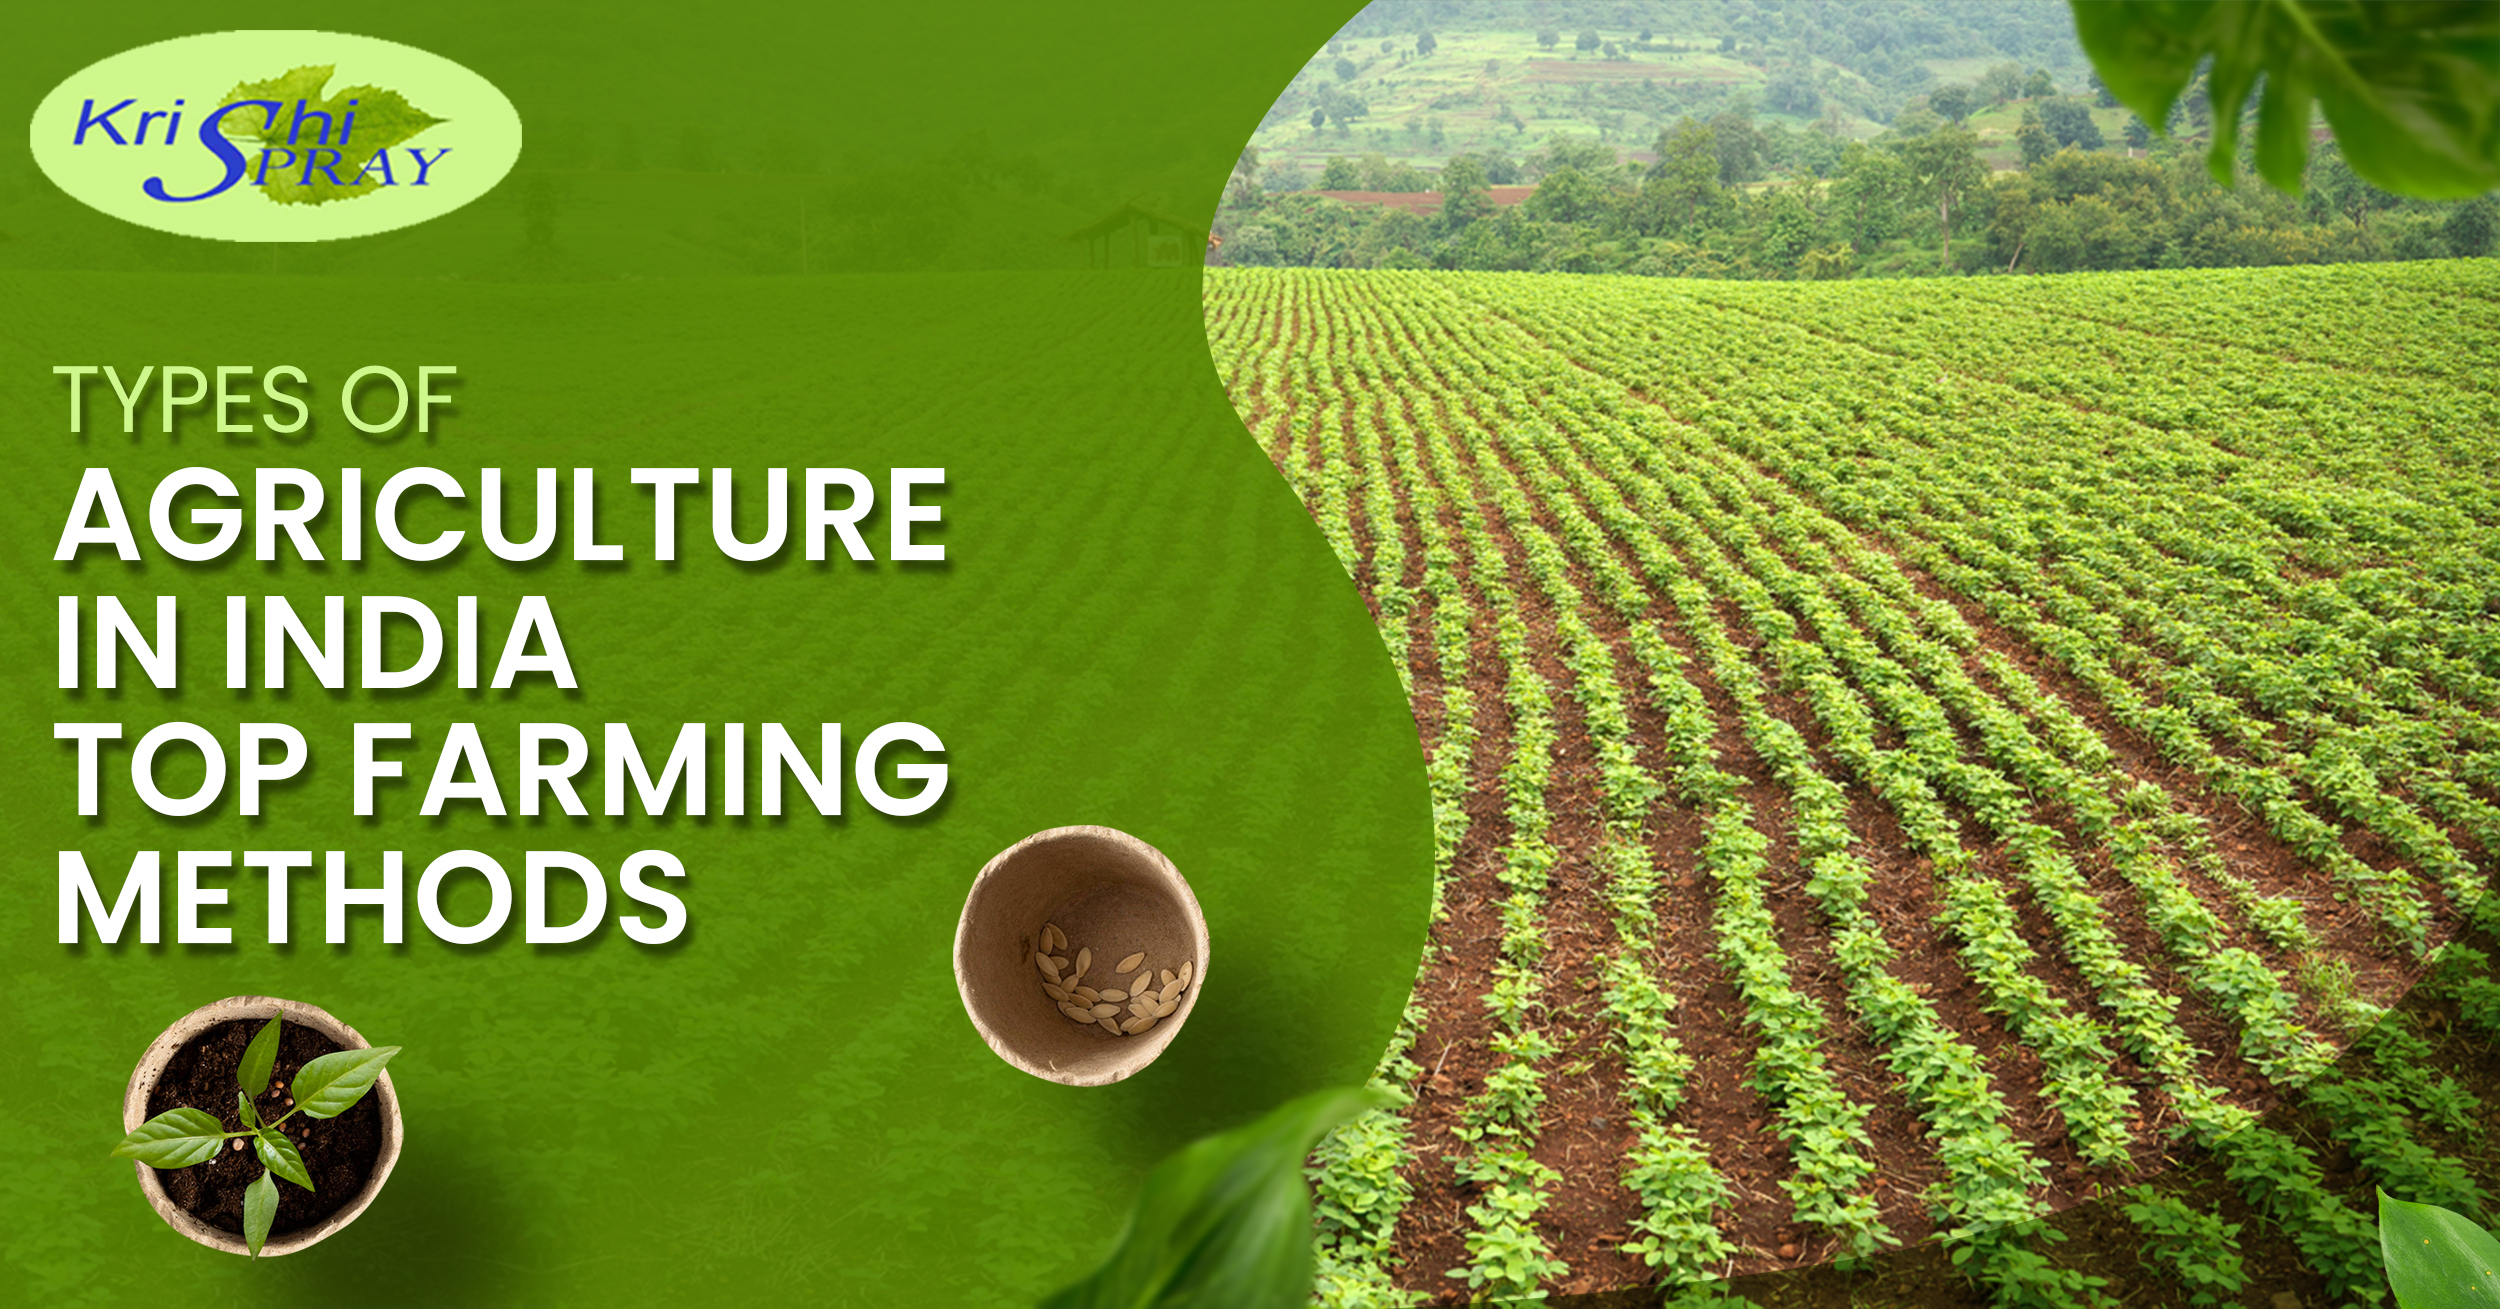 Different Types of Agriculture in India: Top Farming Methods